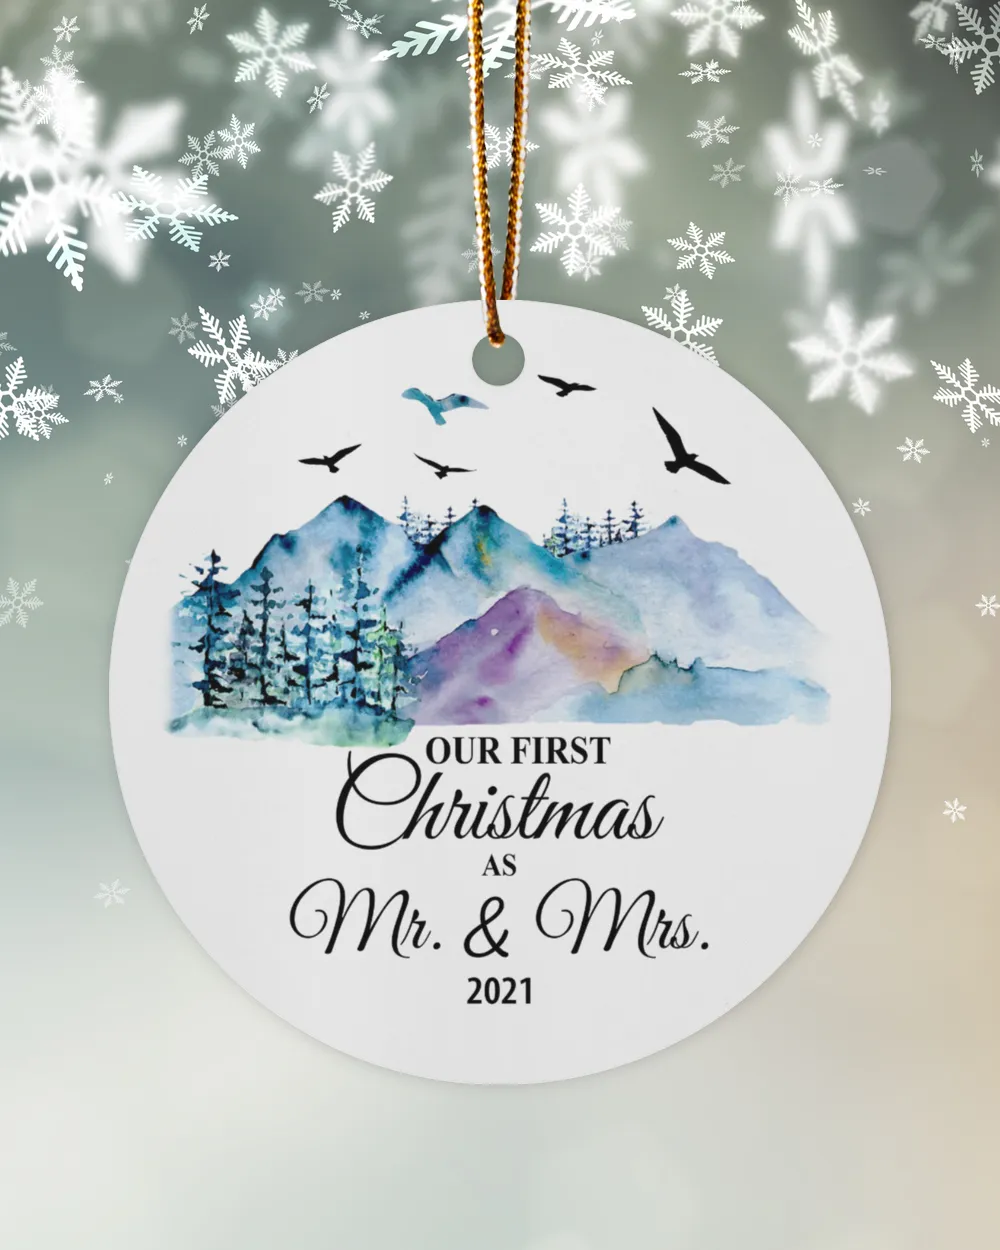 Our First Christmas As Mr. & Mrs. 2021 Ornament